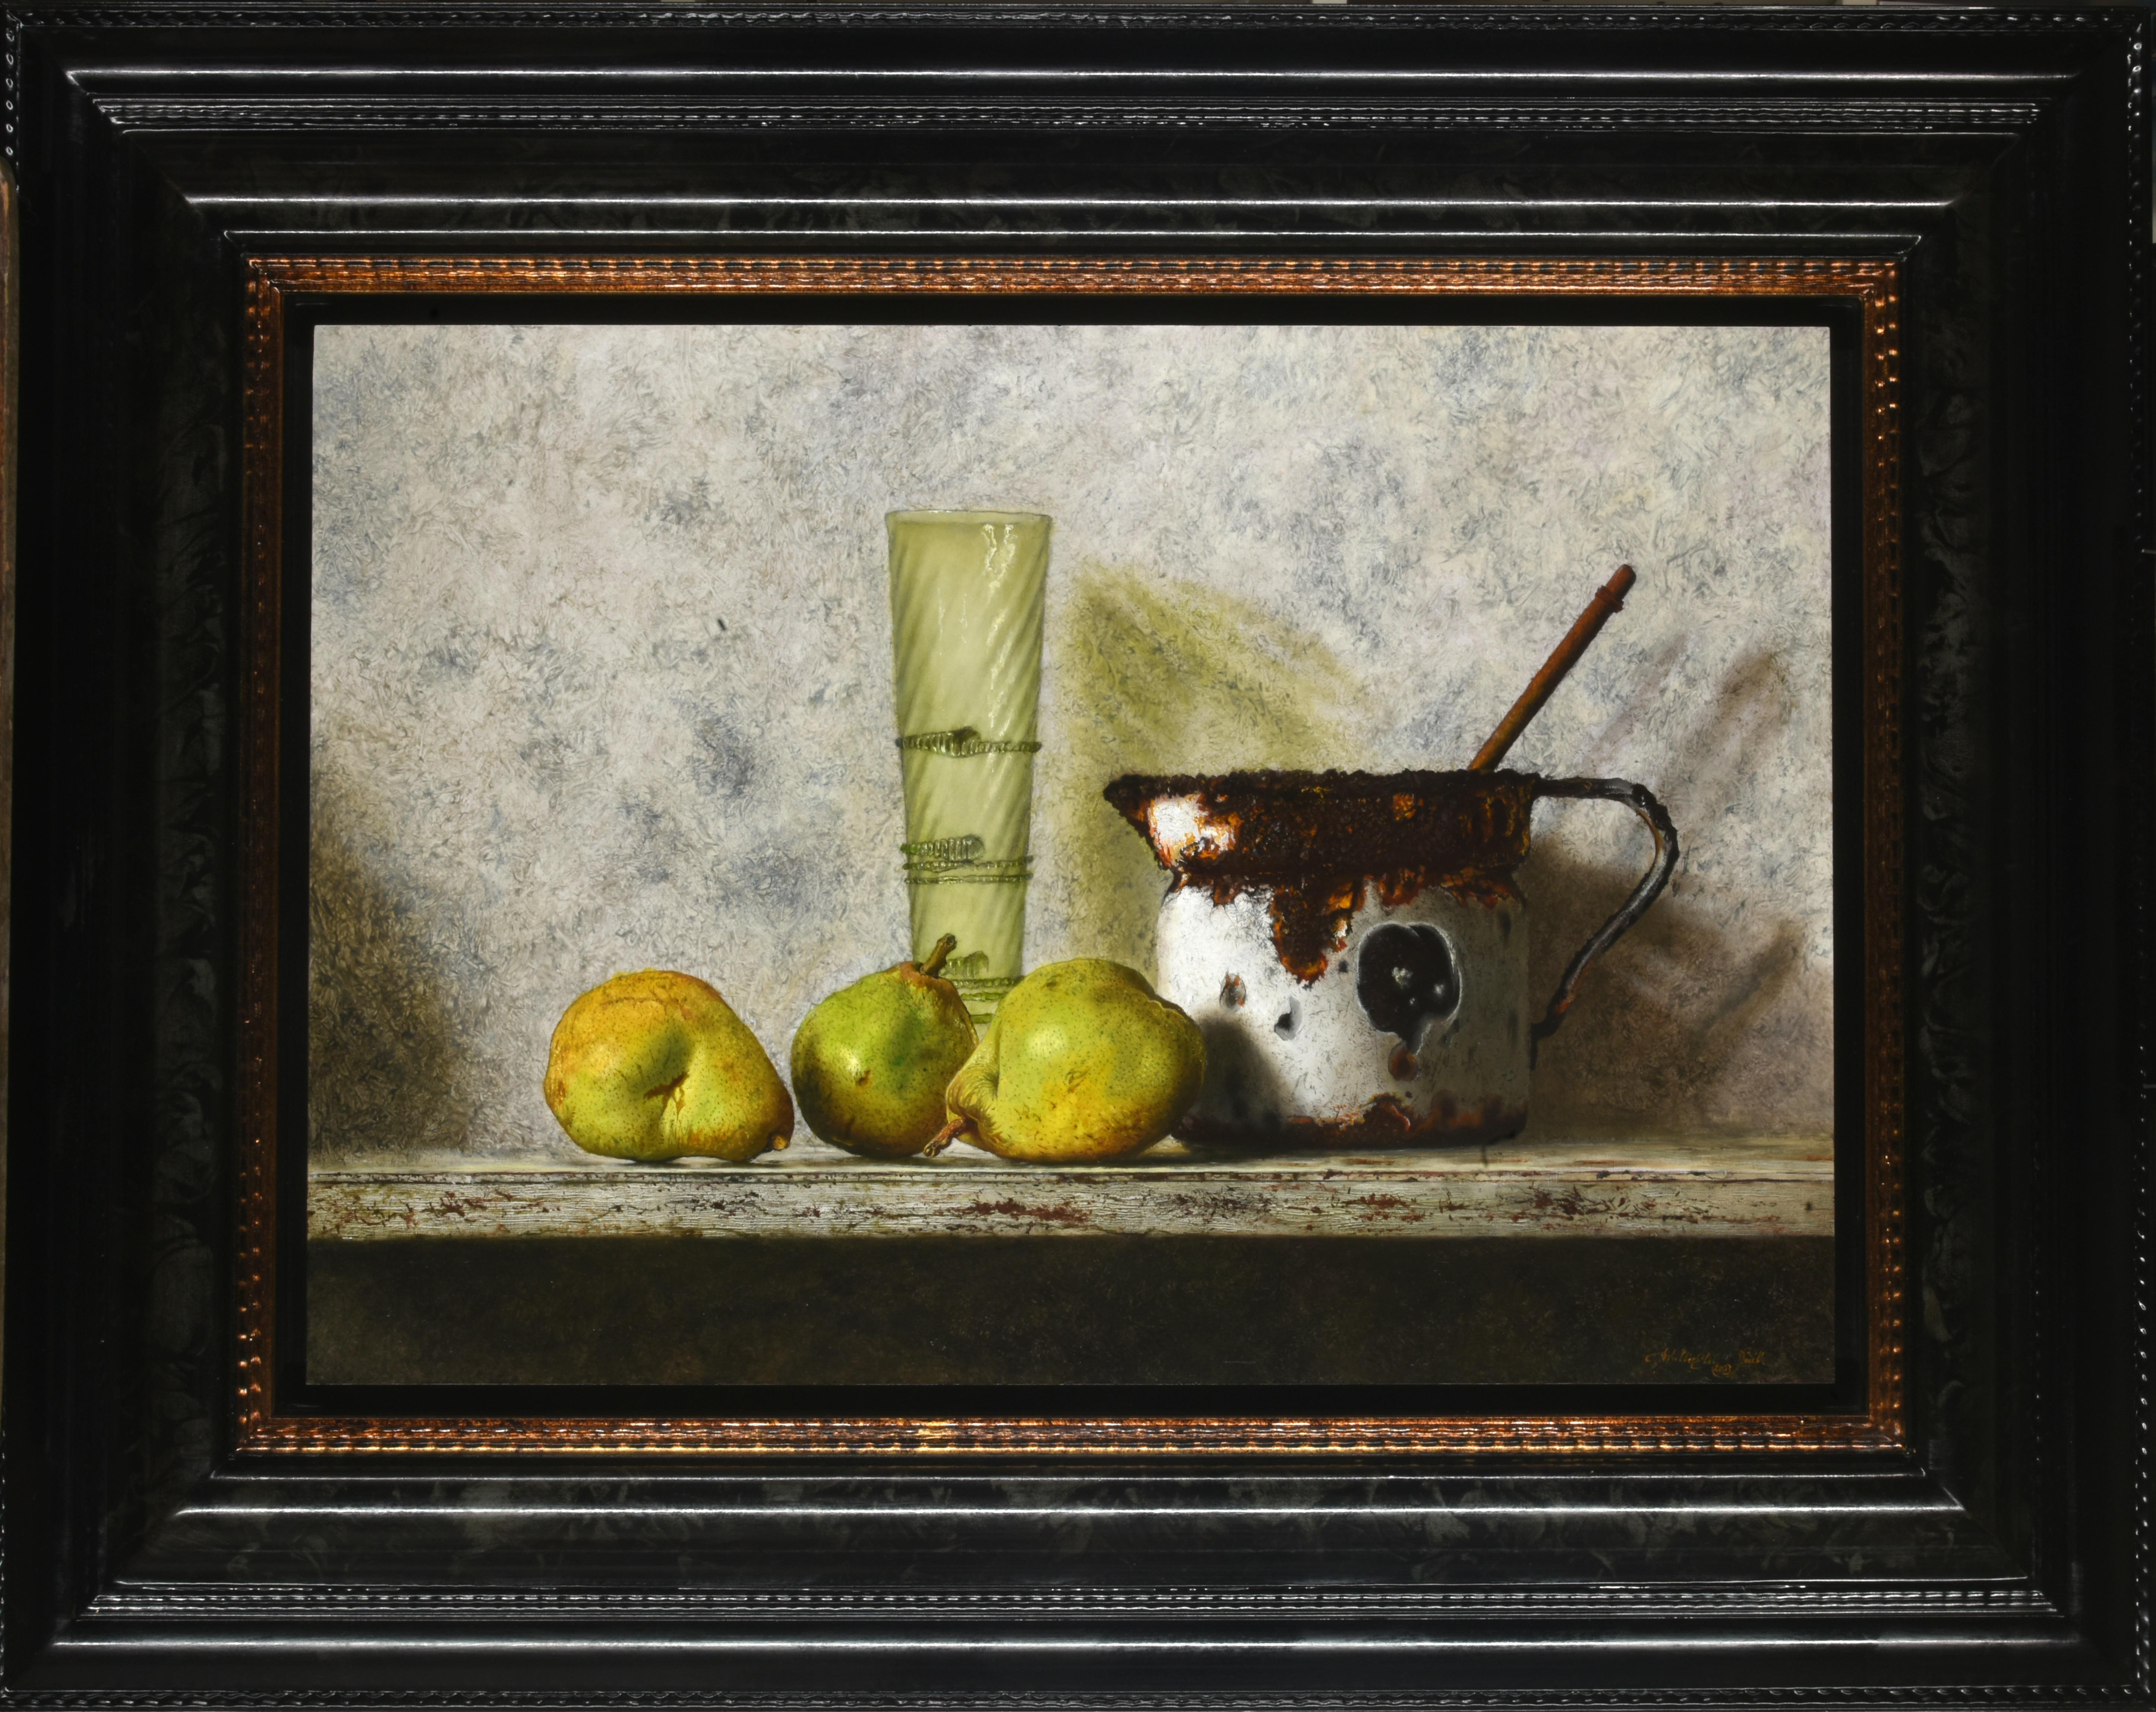 Walter Elst Figurative Painting - Bunker Vondst Find with Comice Peren Pears Oil Painting on Panel In Stock